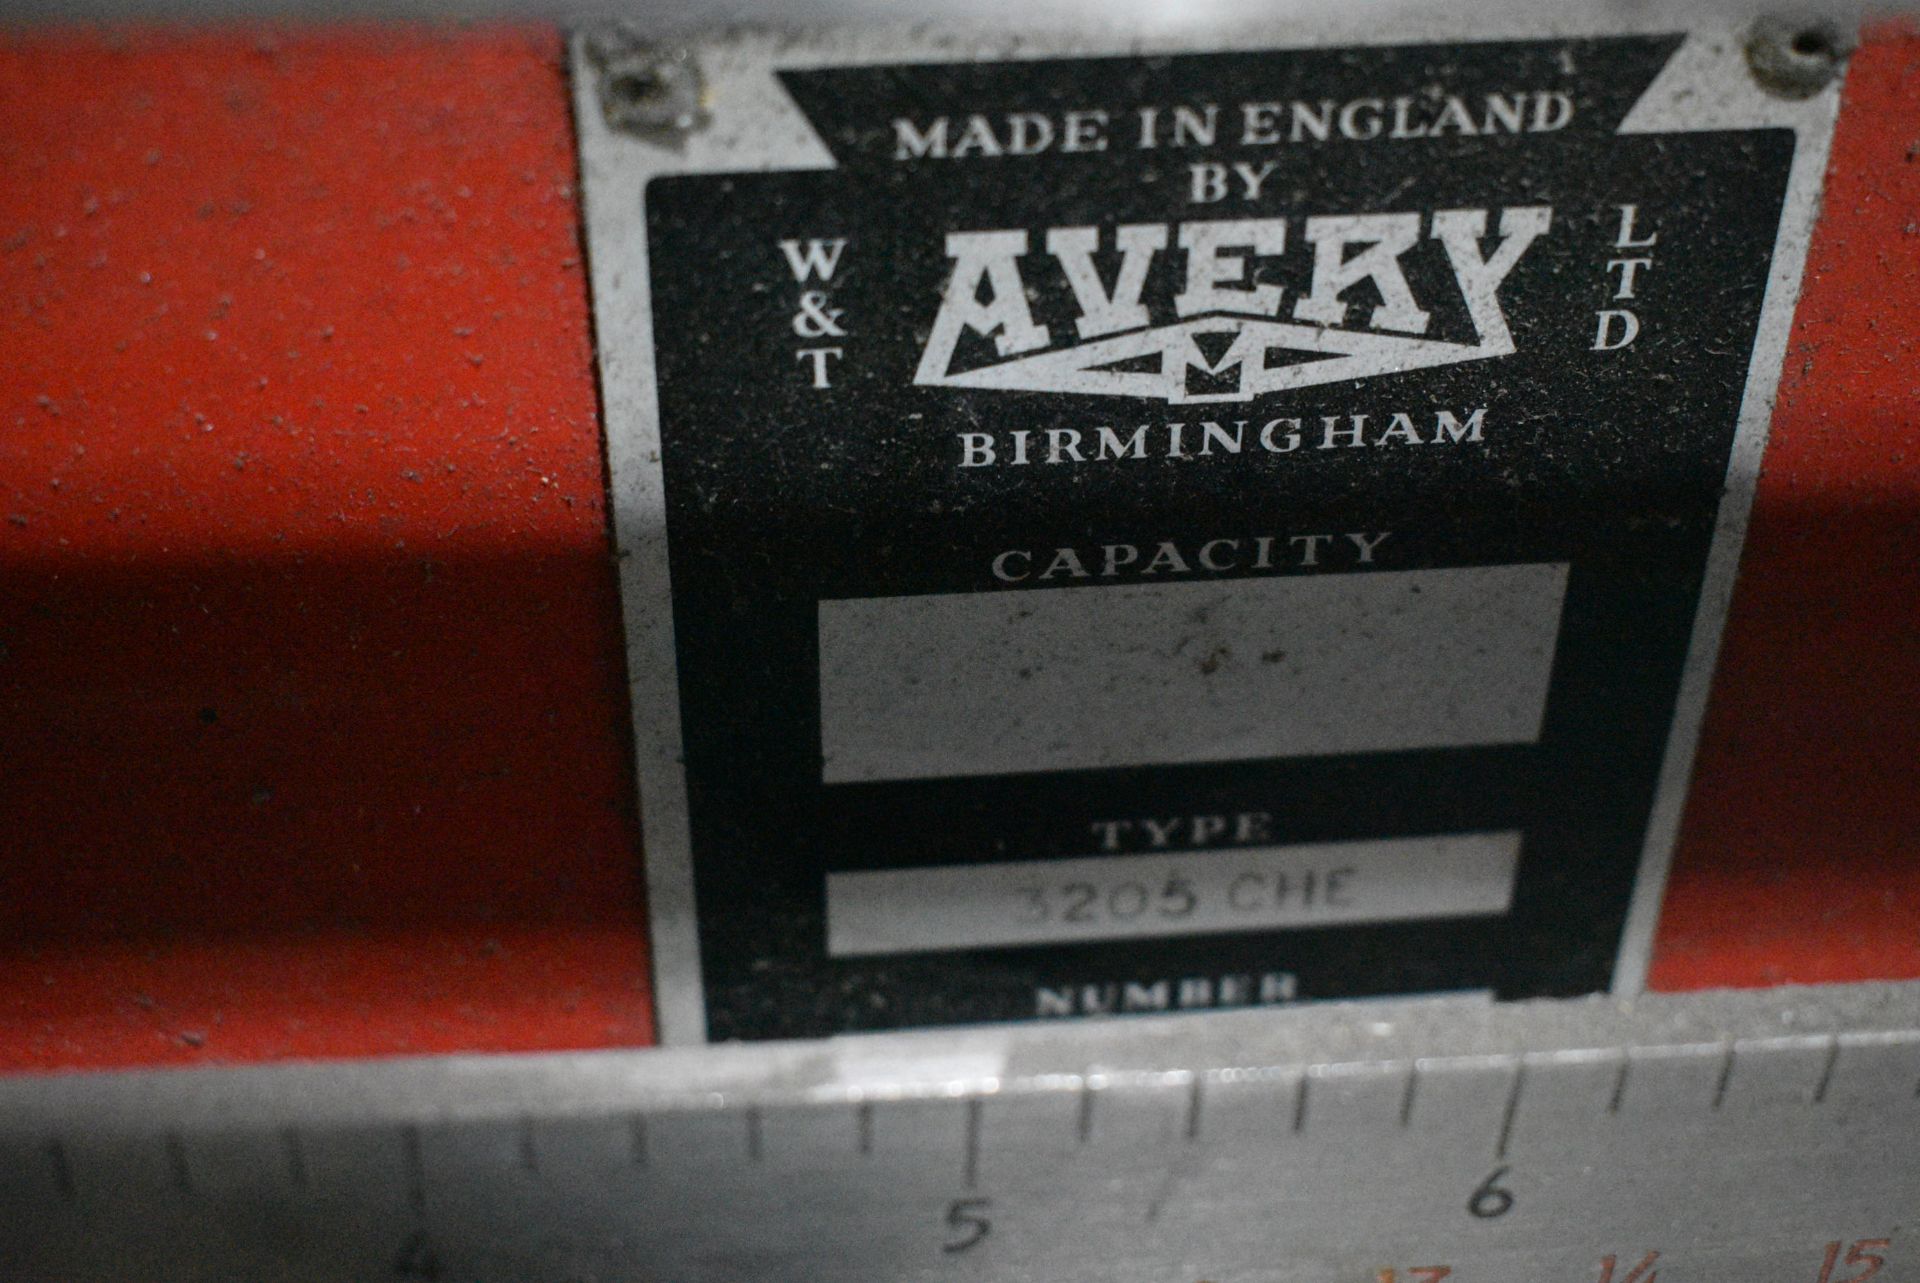 Avery 3205 CHE 110kg capacity Dial Indicating Portable Platform Weighing Machine, serial no. S- - Image 3 of 4